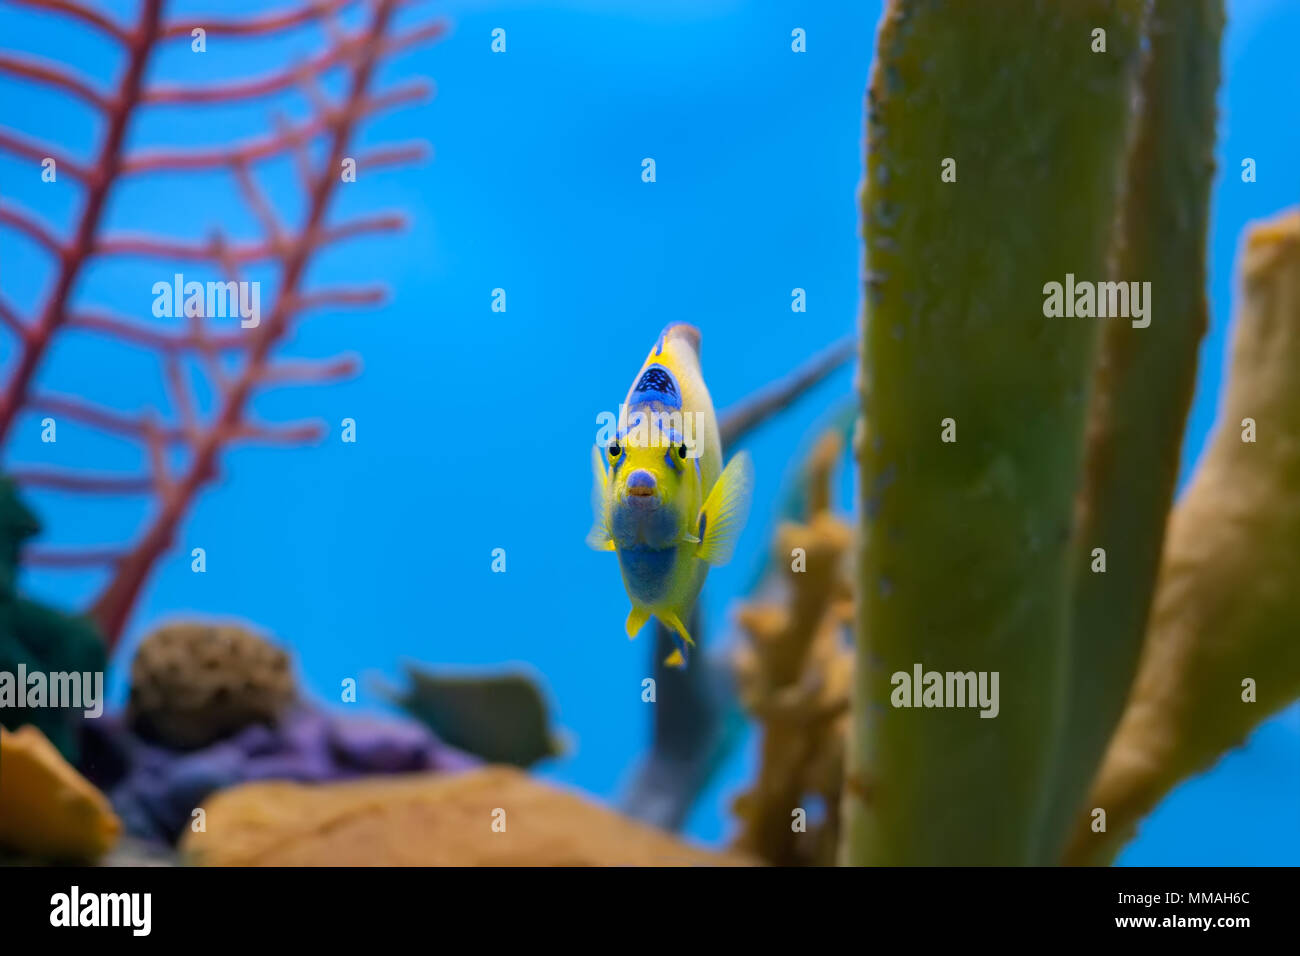 Queen angelfish swimming out from behind yellow coral with other corals in the background Stock Photo